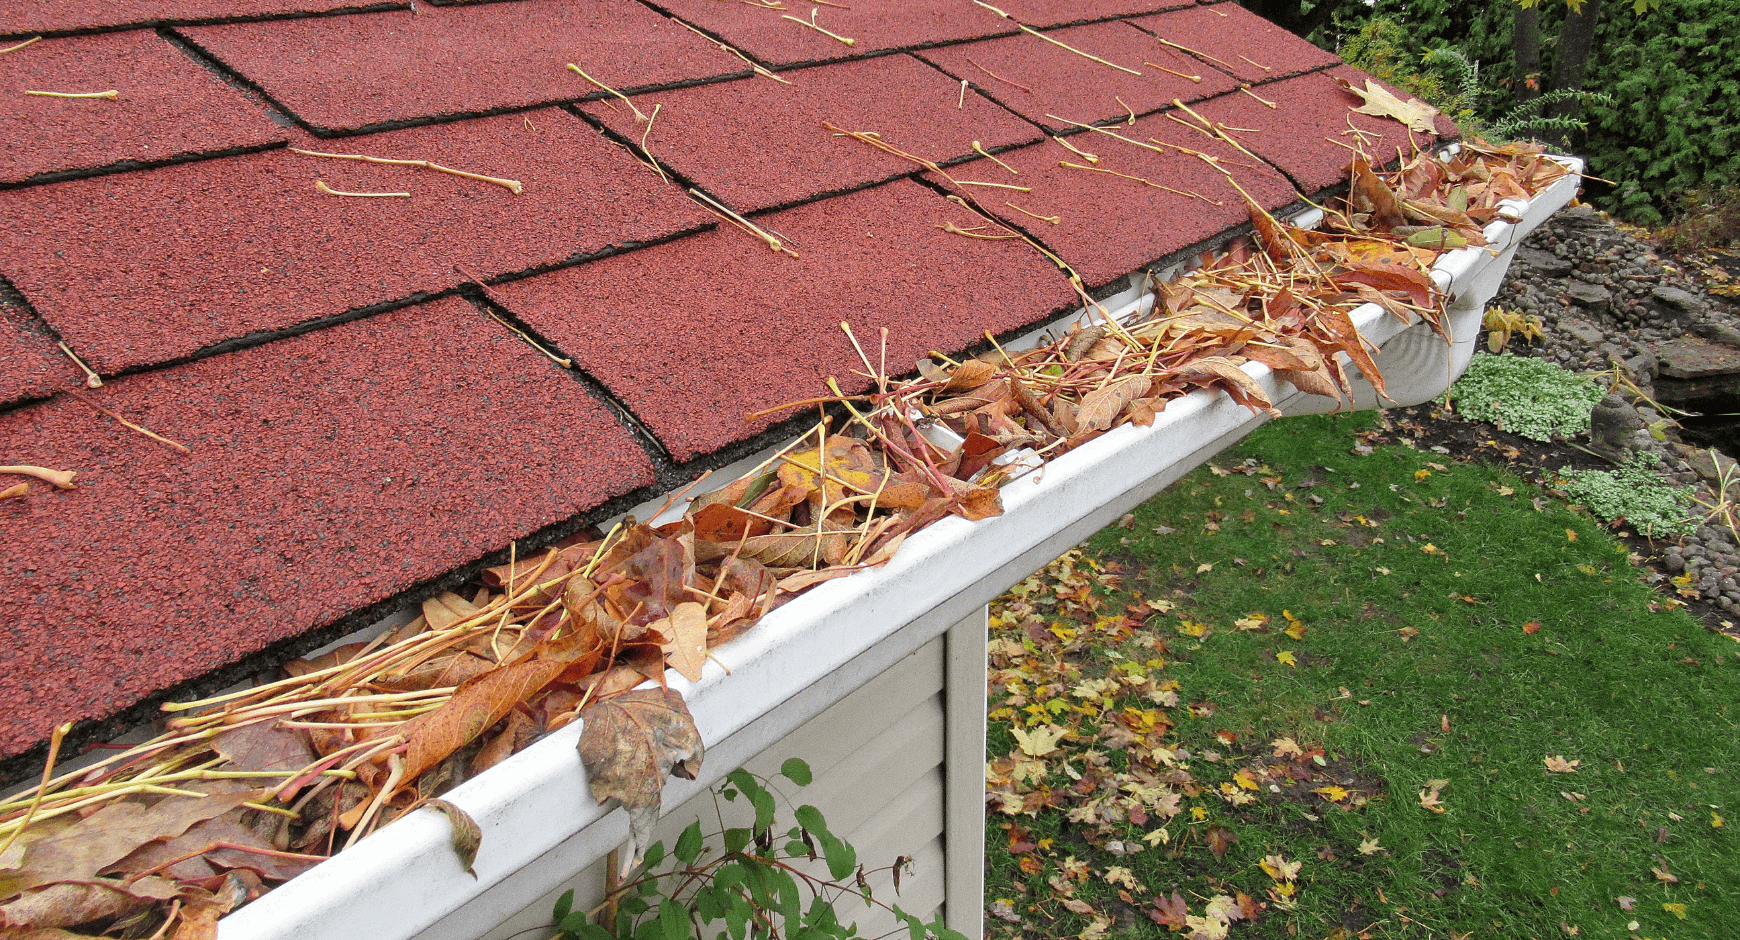 Image of gutters clogged with debris